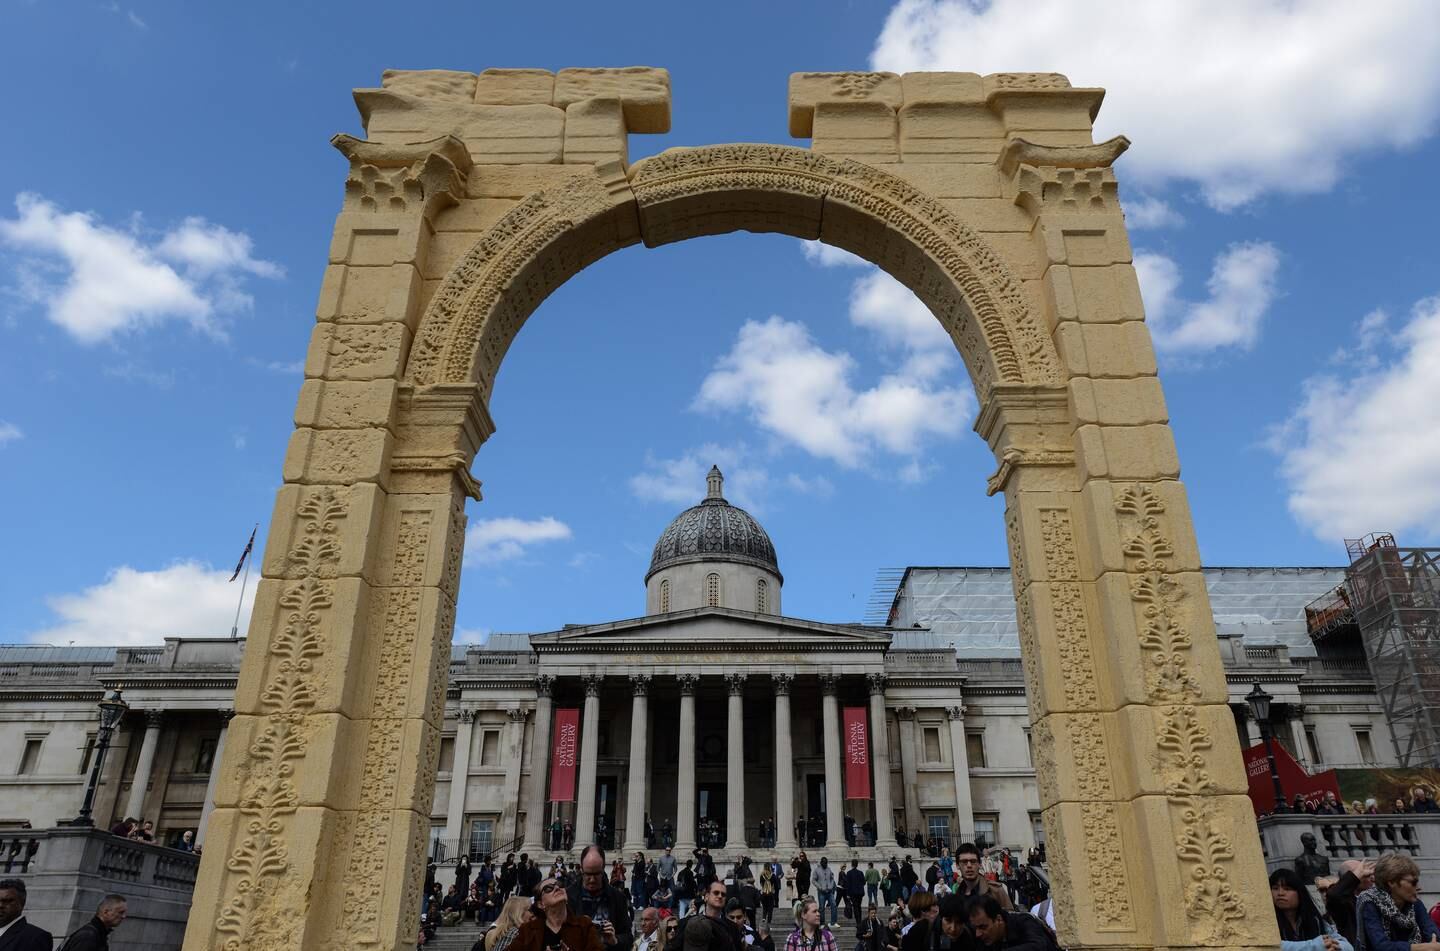 A replica of the Triumphal Arch at Palmyra is unveiled in Trafalgar Square, London, in 2016. The 2,000-year-old arch in the Syrian city was destroyed by ISIS forces in October 2015. Getty Images